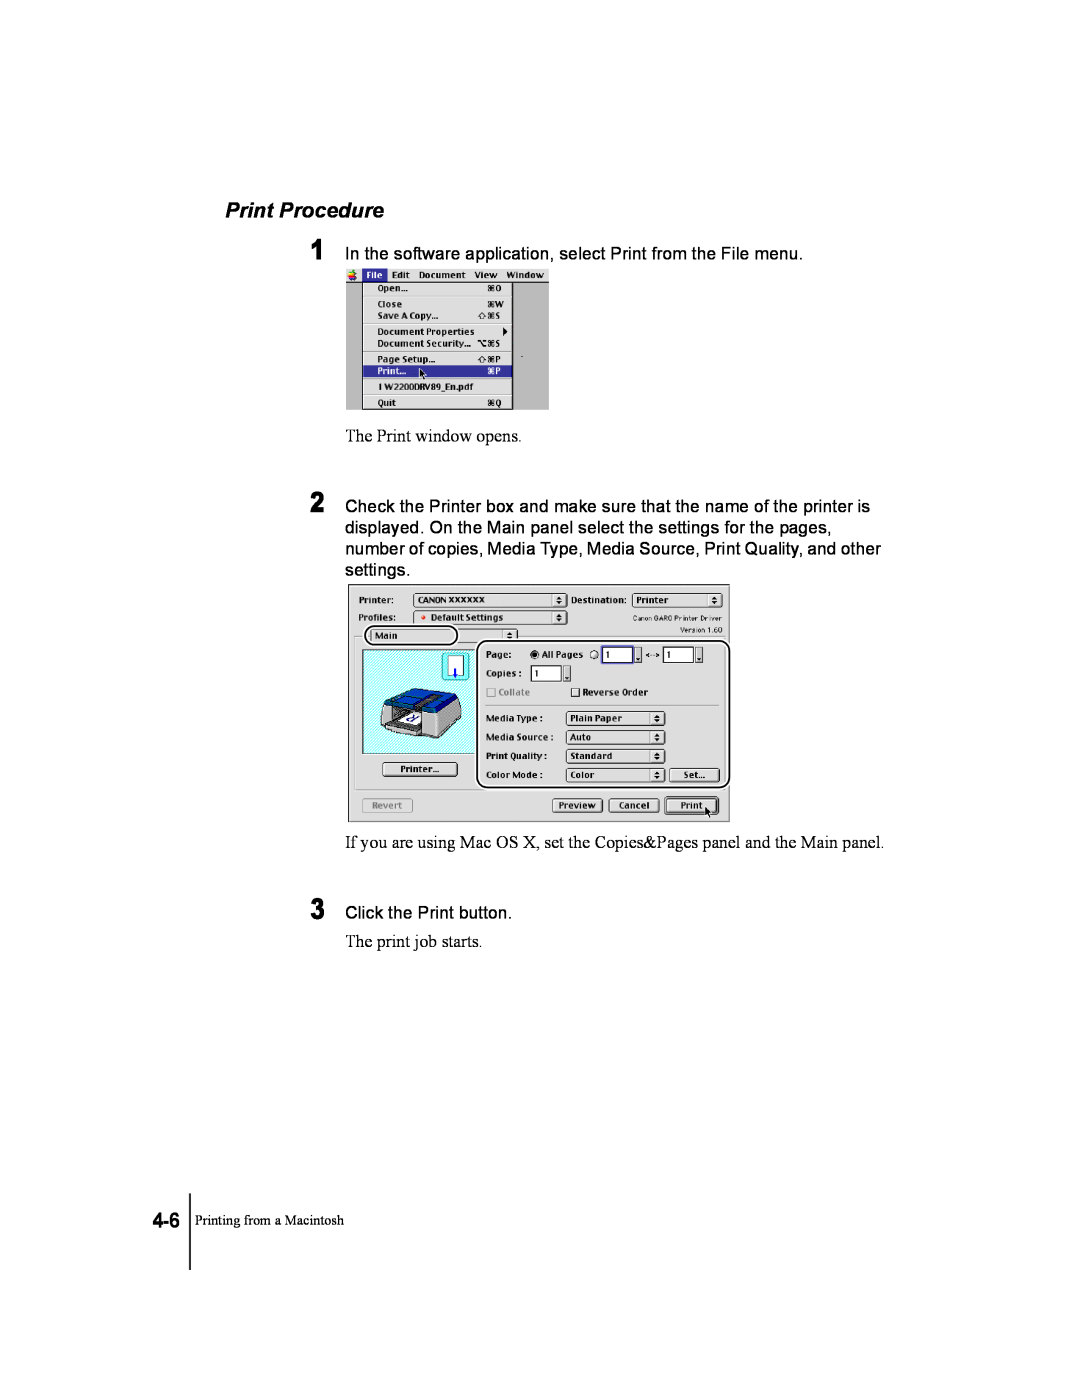 Canon W2200 manual Print Procedure, In the software application, select Print from the File menu 